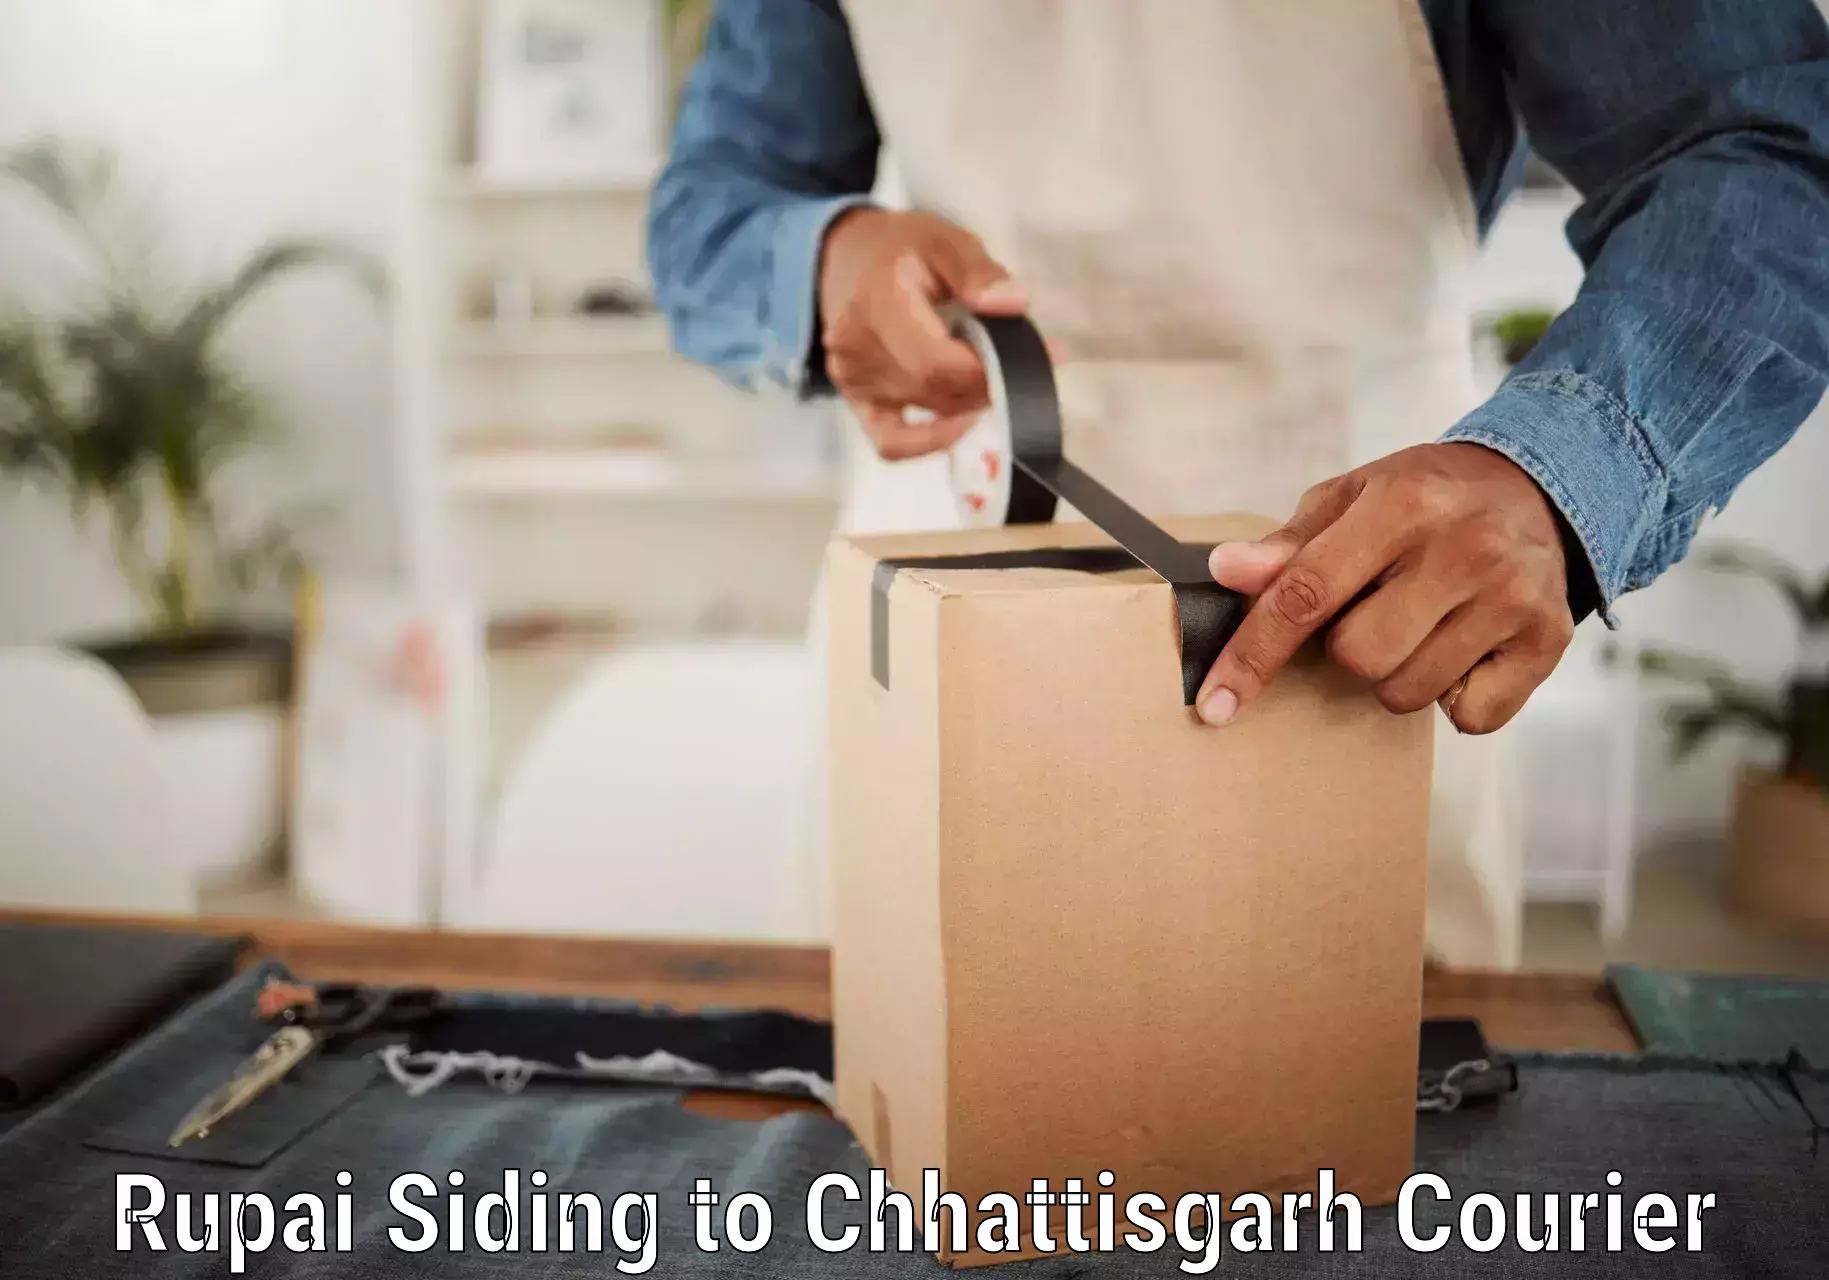 Courier service efficiency Rupai Siding to Mahasamund